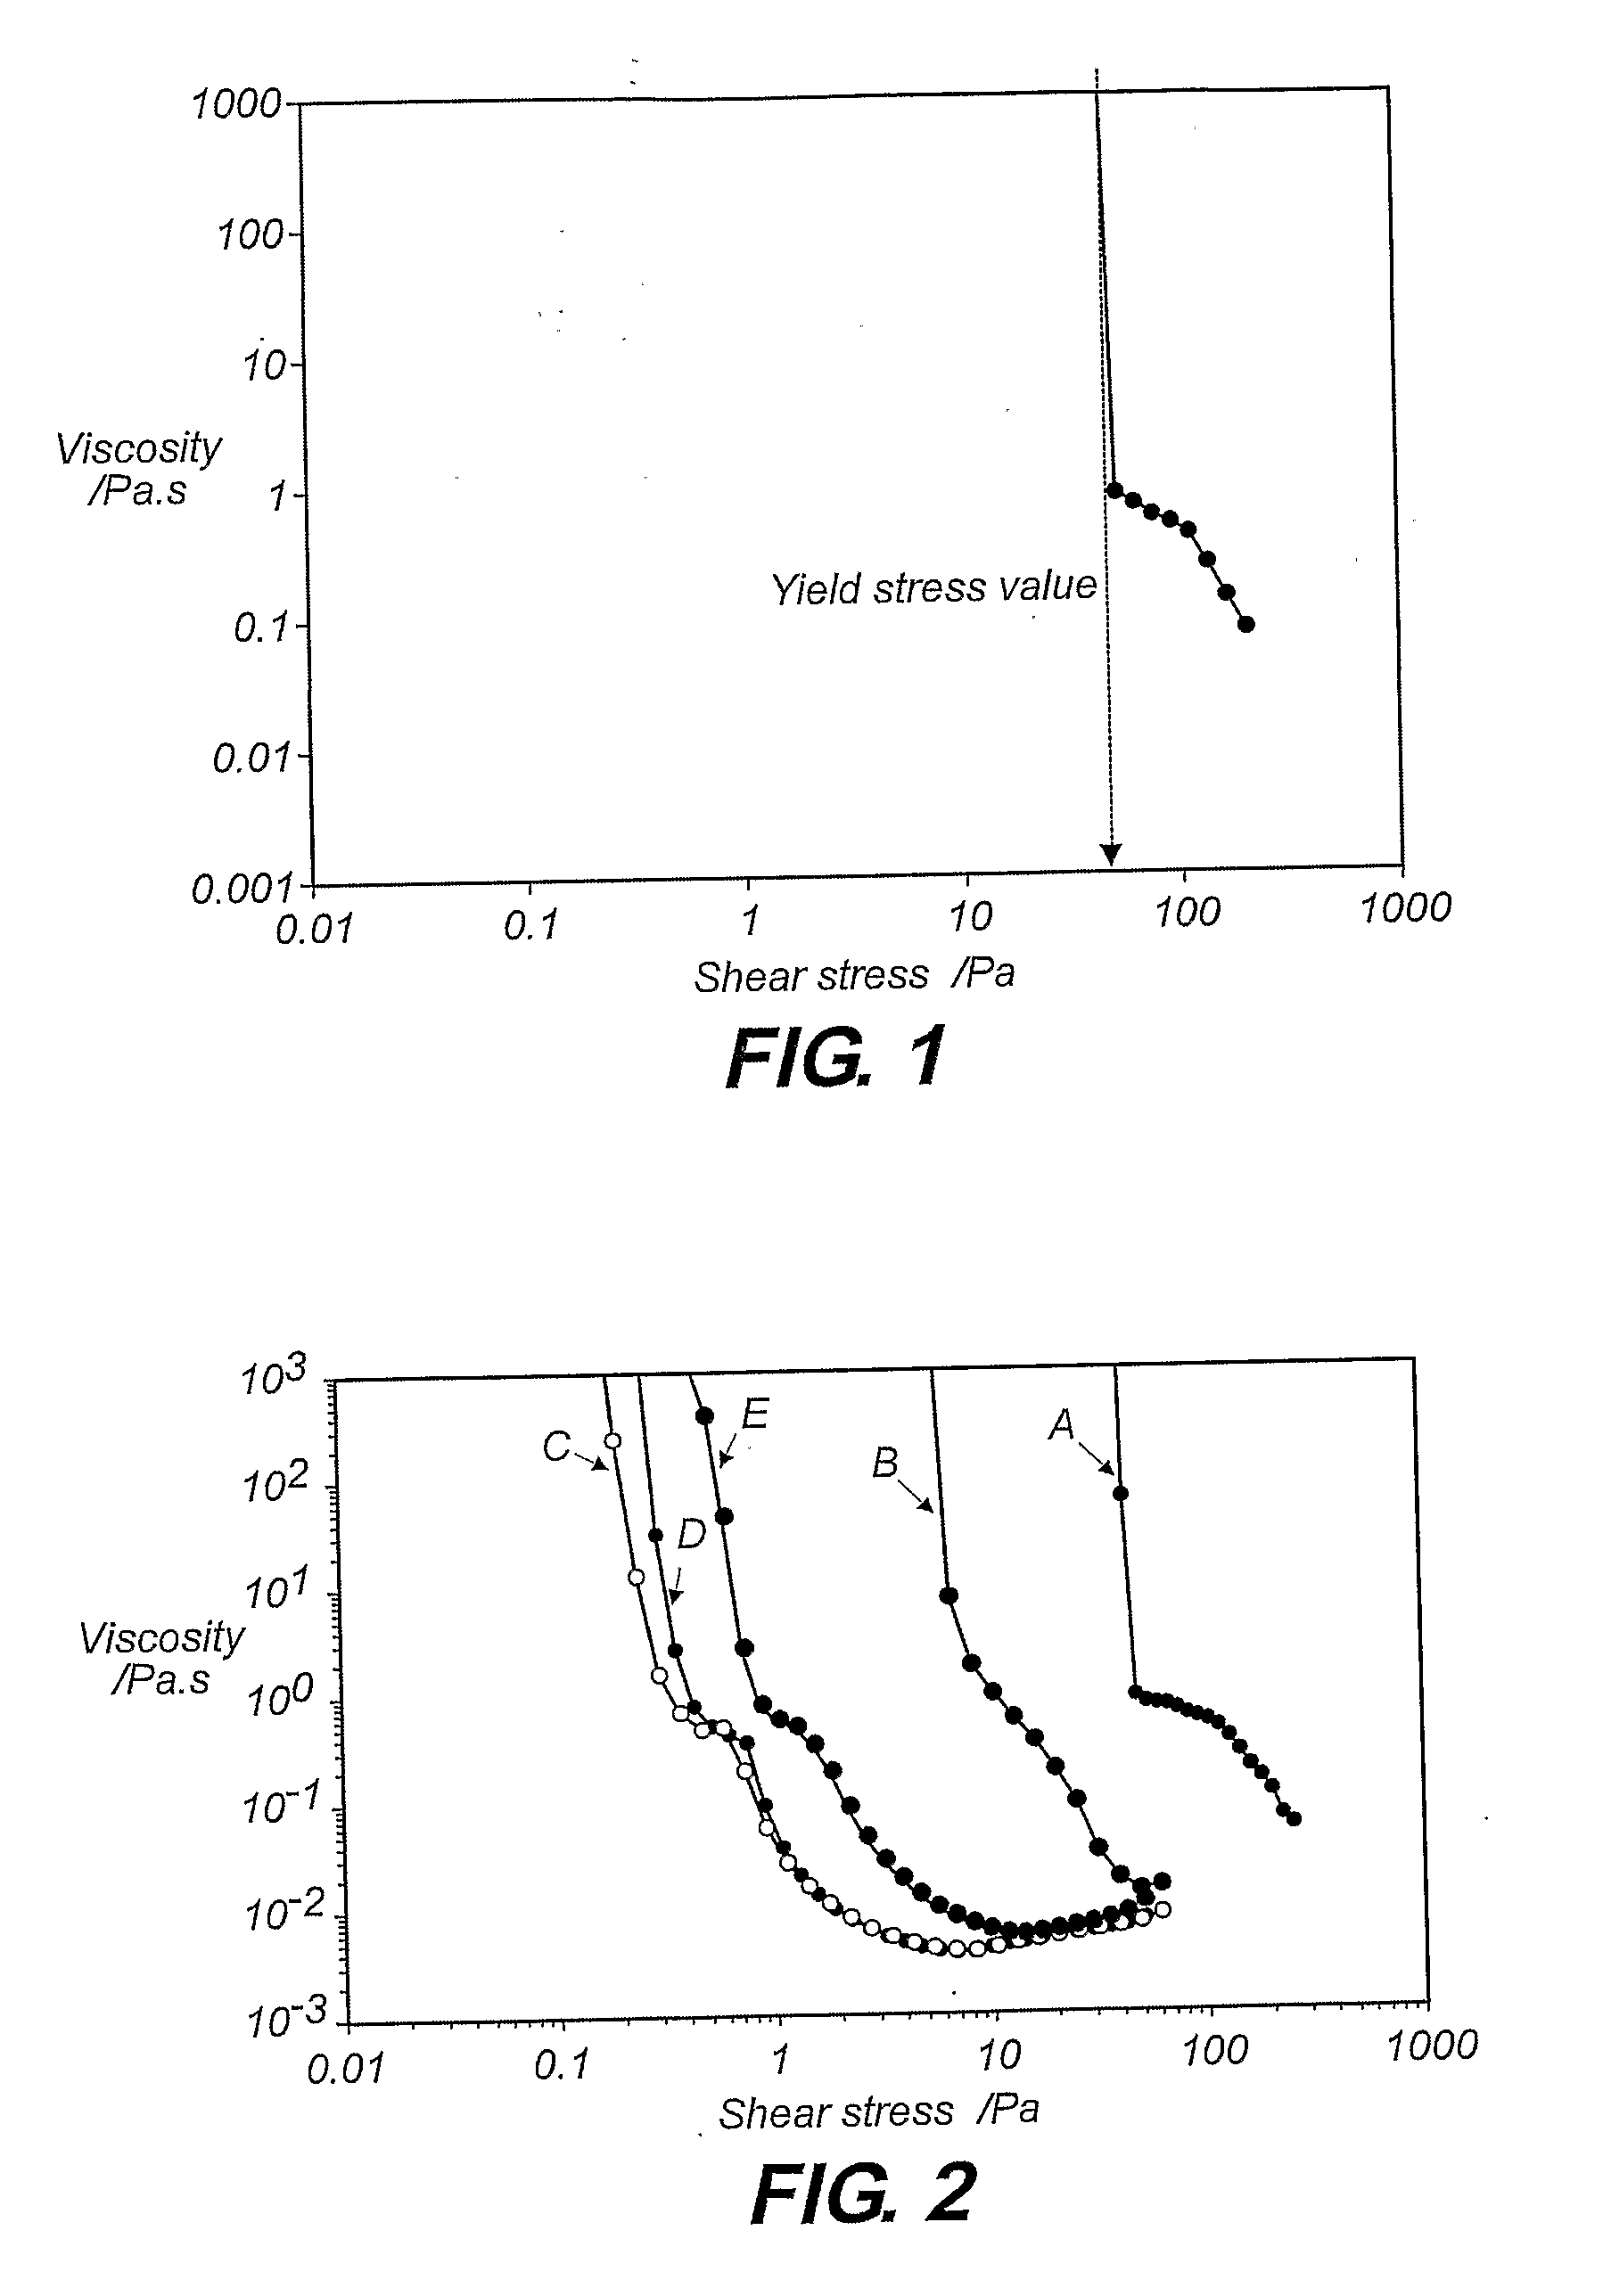 Dispersant For Reducing Viscosity Of Particulate Solids